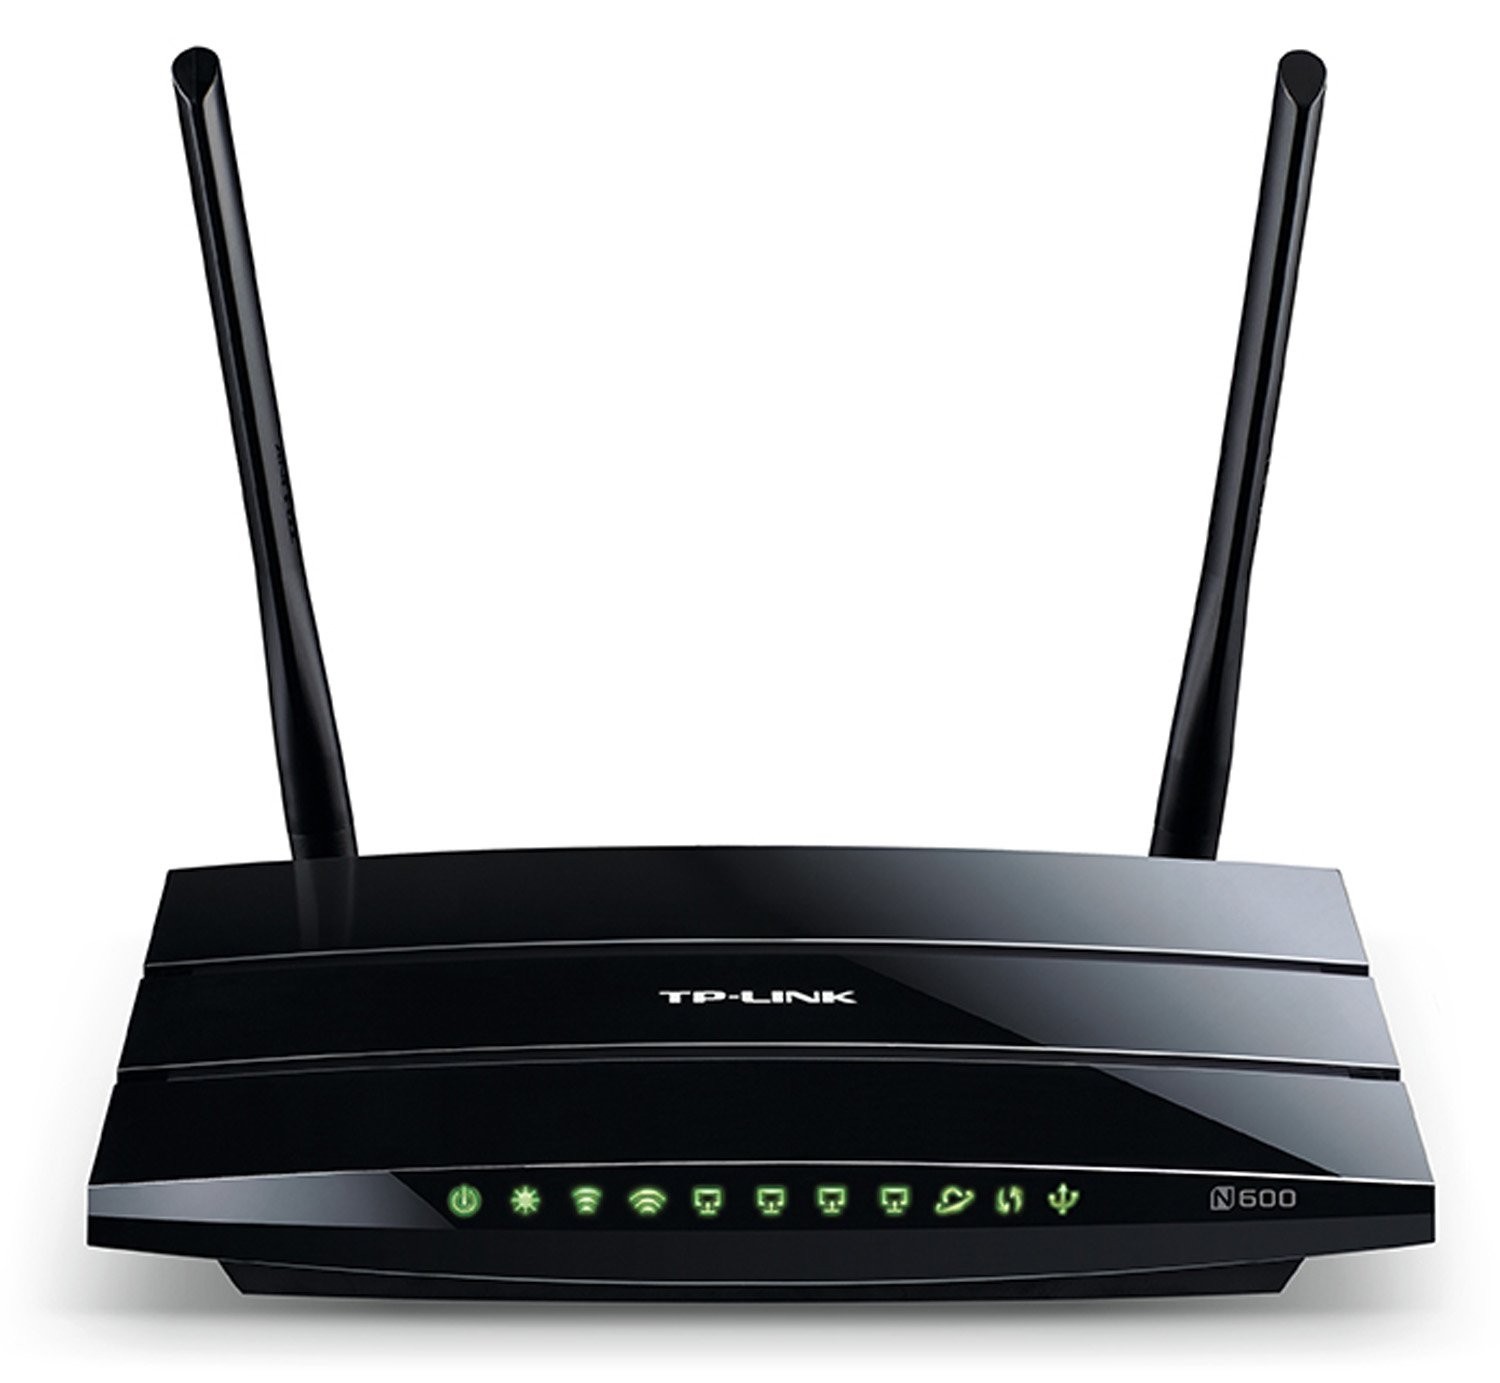 TP-Link N600 Wireless Wi-Fi Dual Band Router (TL-WDR3500)